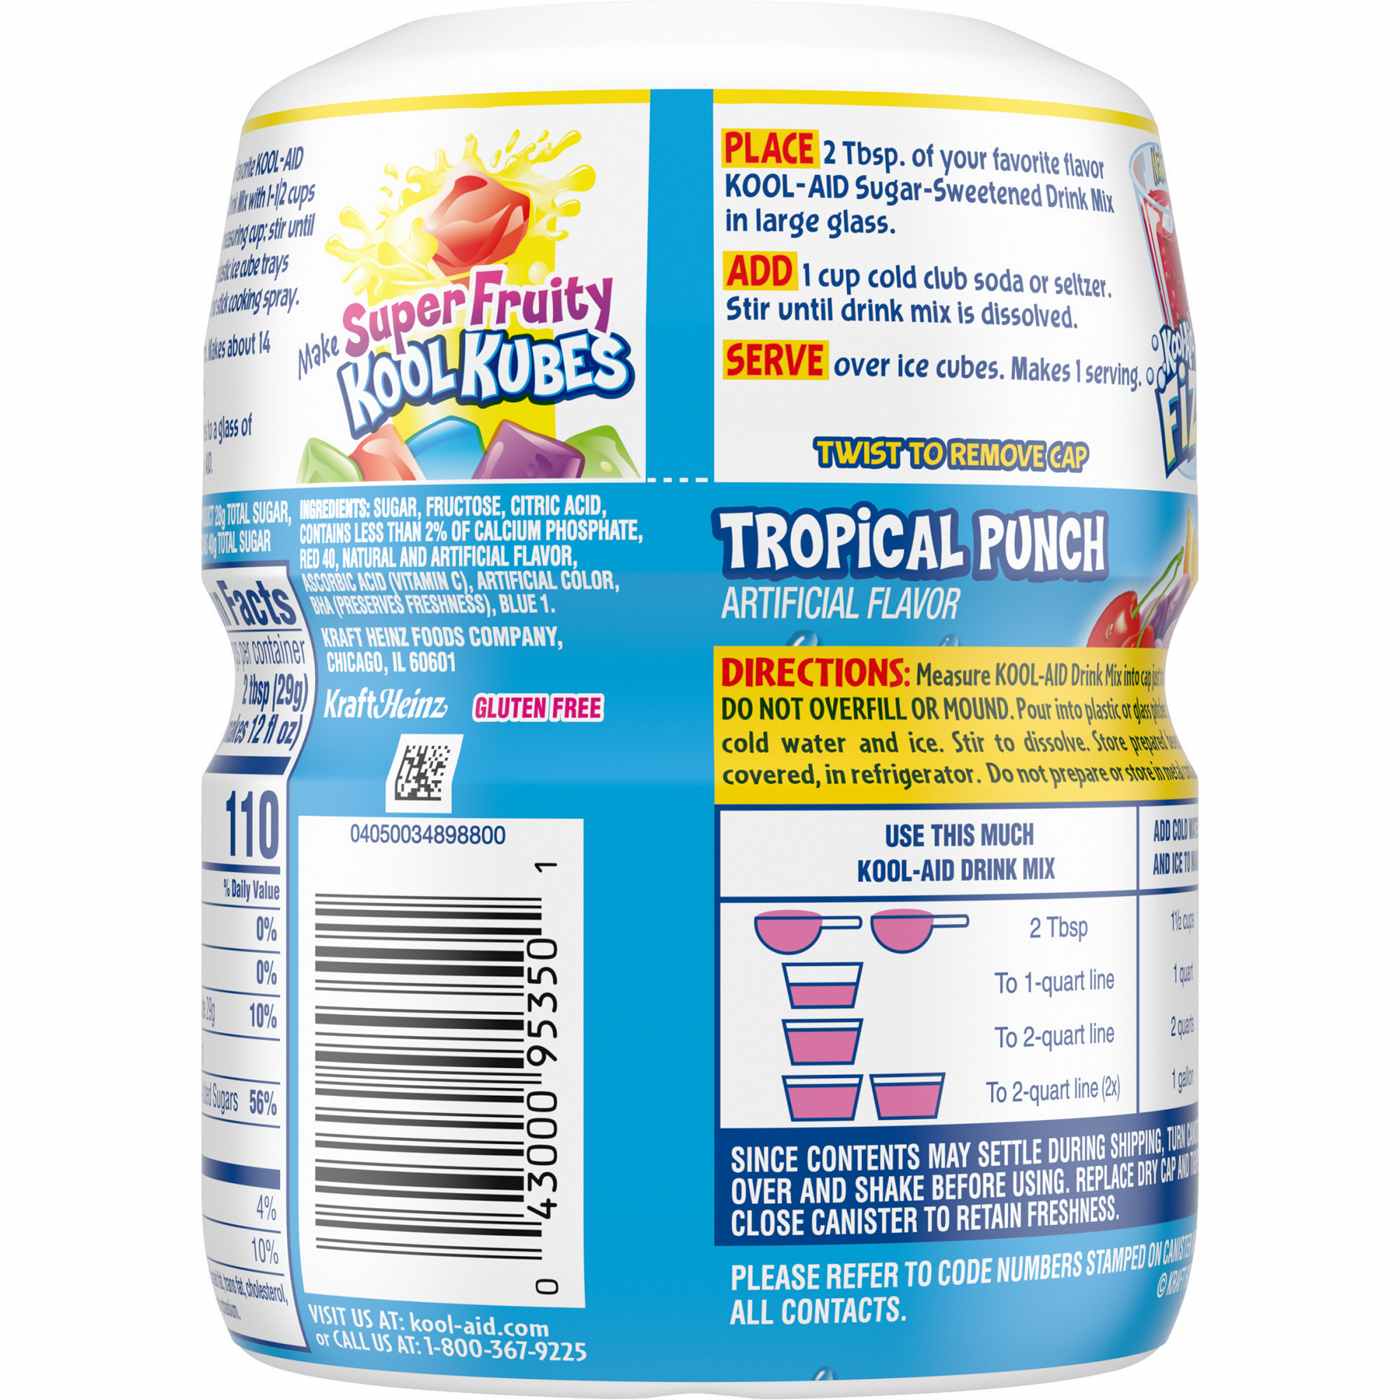 Kool-Aid Sweetened Tropical Punch Powdered Drink Mix; image 5 of 7